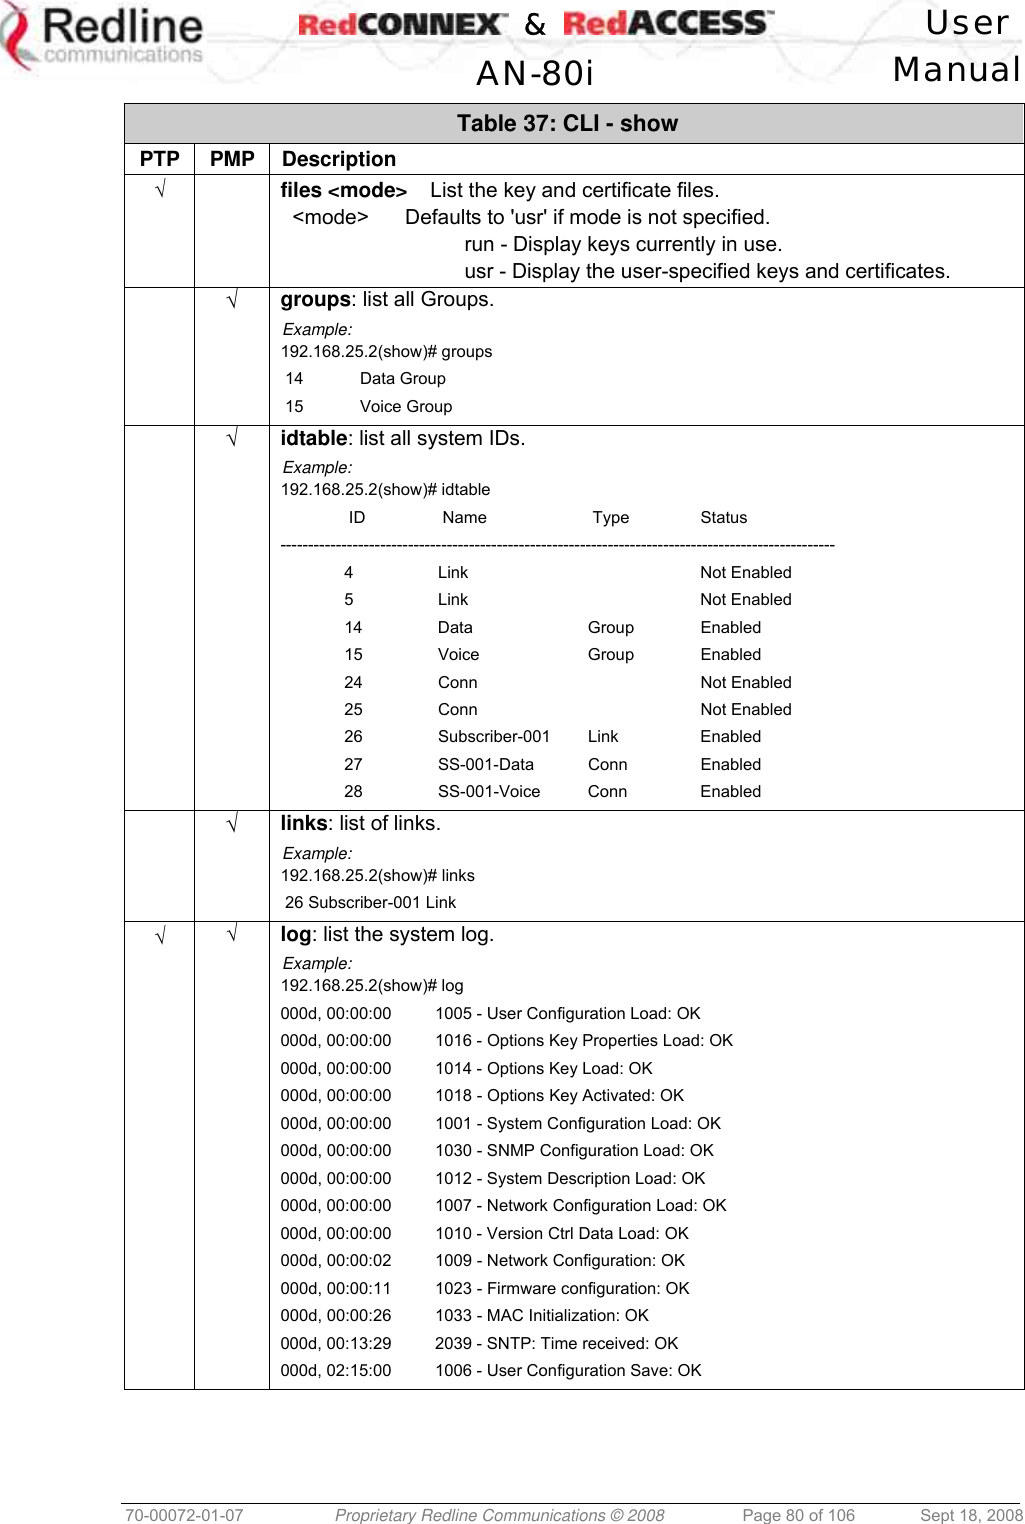    &amp;  User  AN-80i Manual  70-00072-01-07  Proprietary Redline Communications © 2008  Page 80 of 106  Sept 18, 2008 Table 37: CLI - show PTP PMP Description √  files &lt;mode&gt;  List the key and certificate files. &lt;mode&gt;  Defaults to &apos;usr&apos; if mode is not specified.   run - Display keys currently in use.   usr - Display the user-specified keys and certificates.  √ groups: list all Groups. Example: 192.168.25.2(show)# groups  14   Data Group  15   Voice Group  √ idtable: list all system IDs. Example: 192.168.25.2(show)# idtable    ID   Name   Type  Status ----------------------------------------------------------------------------------------------------  4  Link    Not Enabled  5  Link    Not Enabled  14  Data  Group  Enabled  15  Voice  Group  Enabled  24  Conn    Not Enabled  25  Conn    Not Enabled  26  Subscriber-001 Link  Enabled  27  SS-001-Data Conn  Enabled  28  SS-001-Voice Conn  Enabled  √ links: list of links. Example: 192.168.25.2(show)# links  26 Subscriber-001 Link √ √ log: list the system log. Example: 192.168.25.2(show)# log 000d, 00:00:00   1005 - User Configuration Load: OK 000d, 00:00:00   1016 - Options Key Properties Load: OK 000d, 00:00:00   1014 - Options Key Load: OK 000d, 00:00:00   1018 - Options Key Activated: OK 000d, 00:00:00   1001 - System Configuration Load: OK 000d, 00:00:00   1030 - SNMP Configuration Load: OK 000d, 00:00:00   1012 - System Description Load: OK 000d, 00:00:00   1007 - Network Configuration Load: OK 000d, 00:00:00   1010 - Version Ctrl Data Load: OK 000d, 00:00:02   1009 - Network Configuration: OK 000d, 00:00:11   1023 - Firmware configuration: OK 000d, 00:00:26   1033 - MAC Initialization: OK 000d, 00:13:29   2039 - SNTP: Time received: OK 000d, 02:15:00   1006 - User Configuration Save: OK 